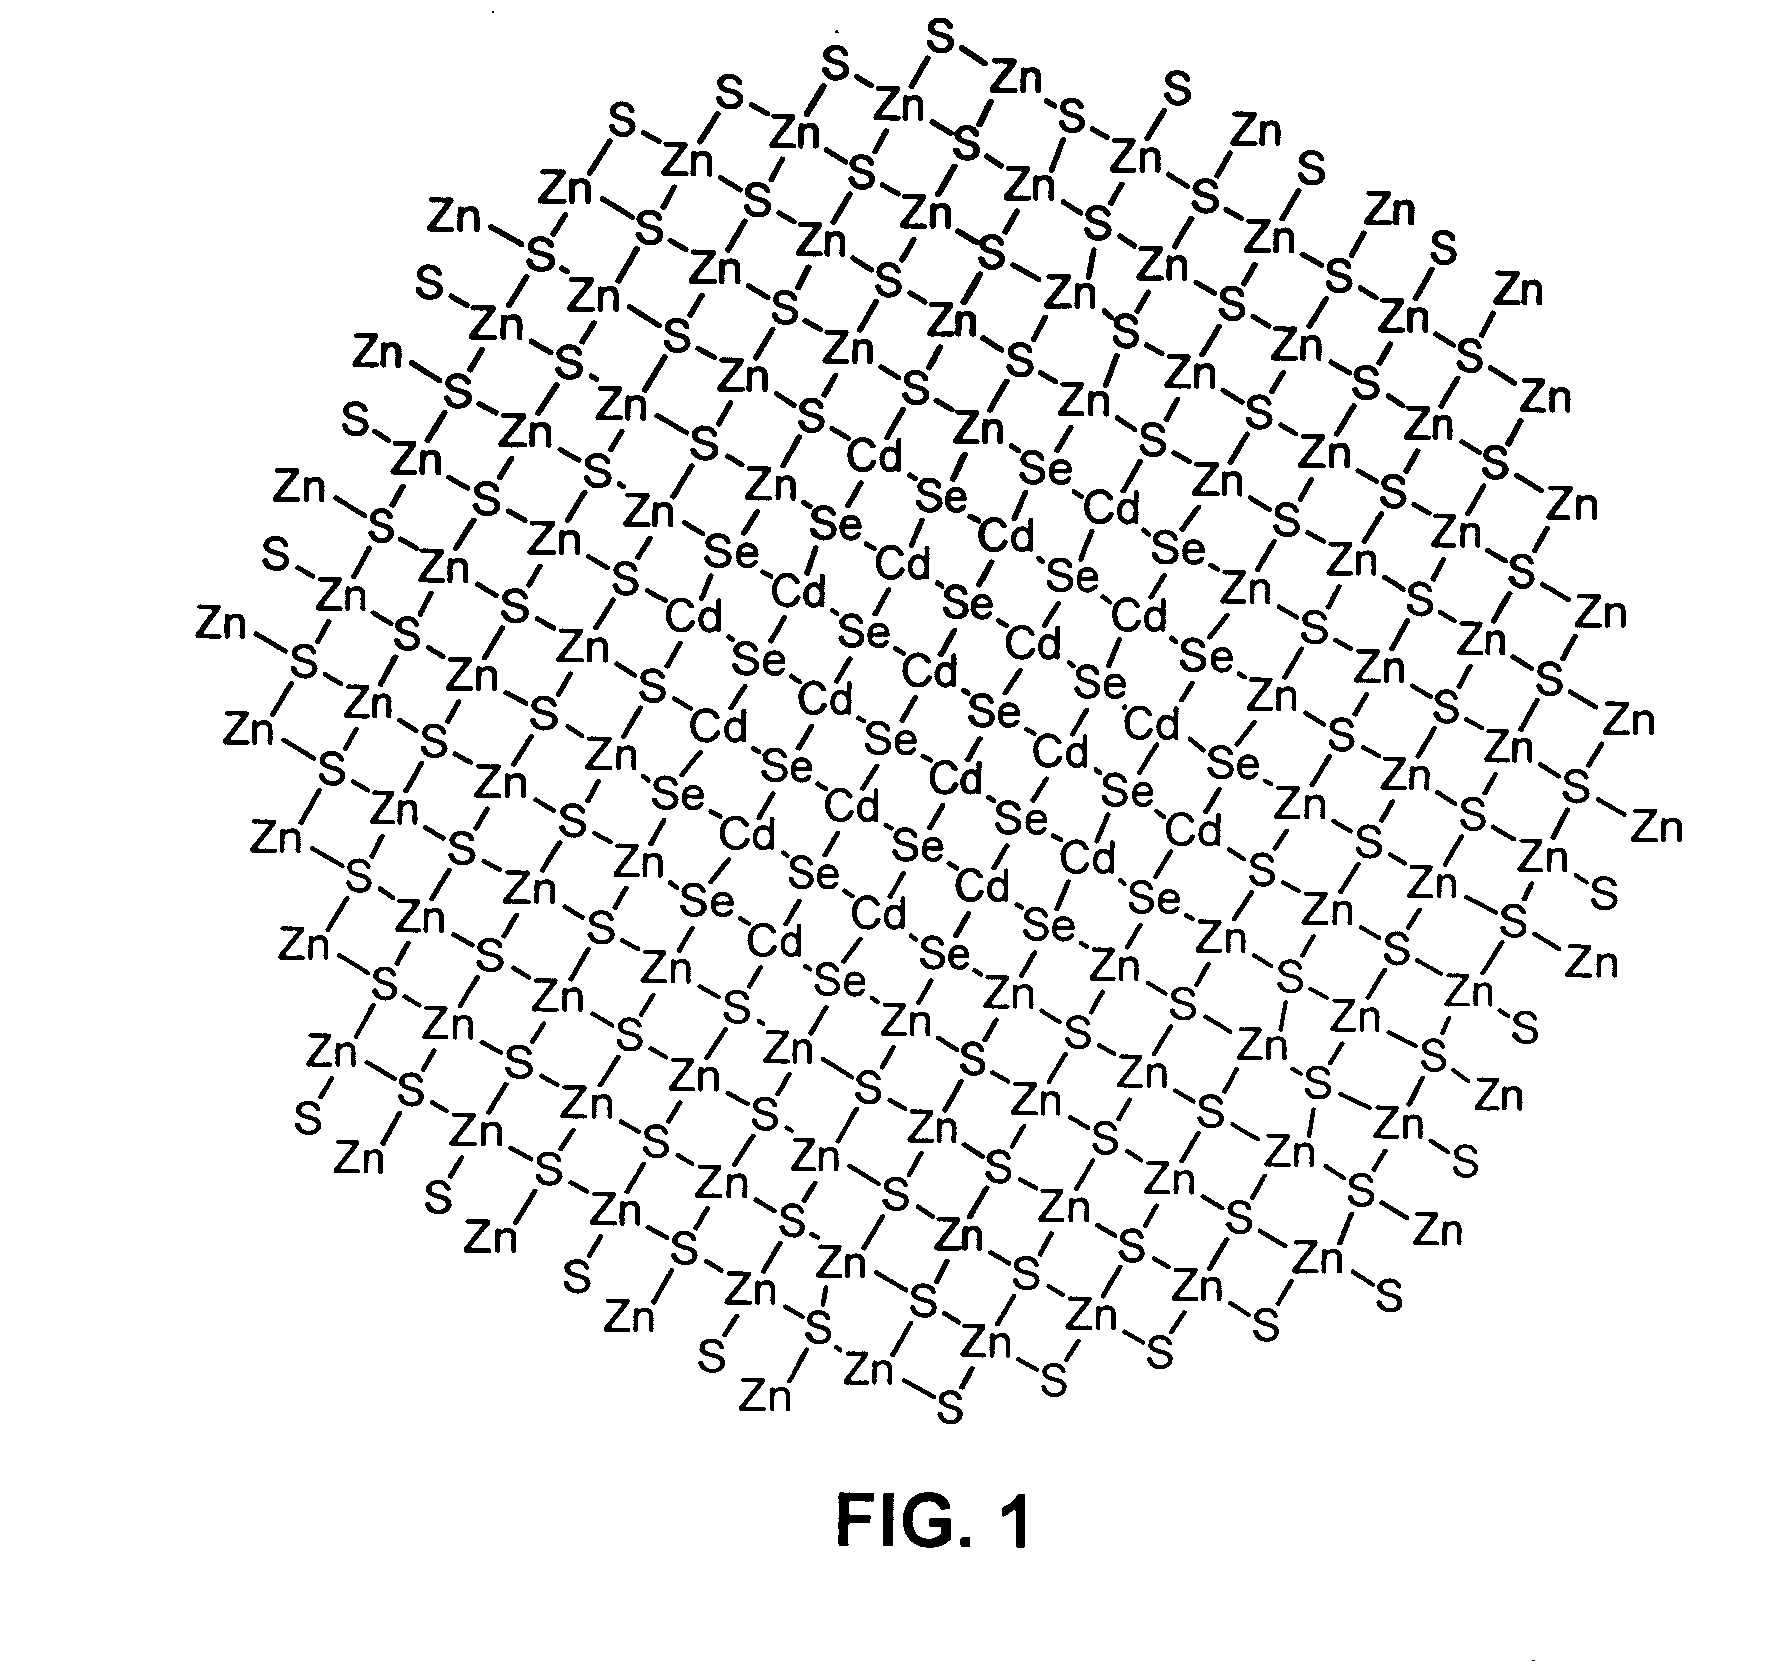 Luminescent nanoparticles and methods for their preparation